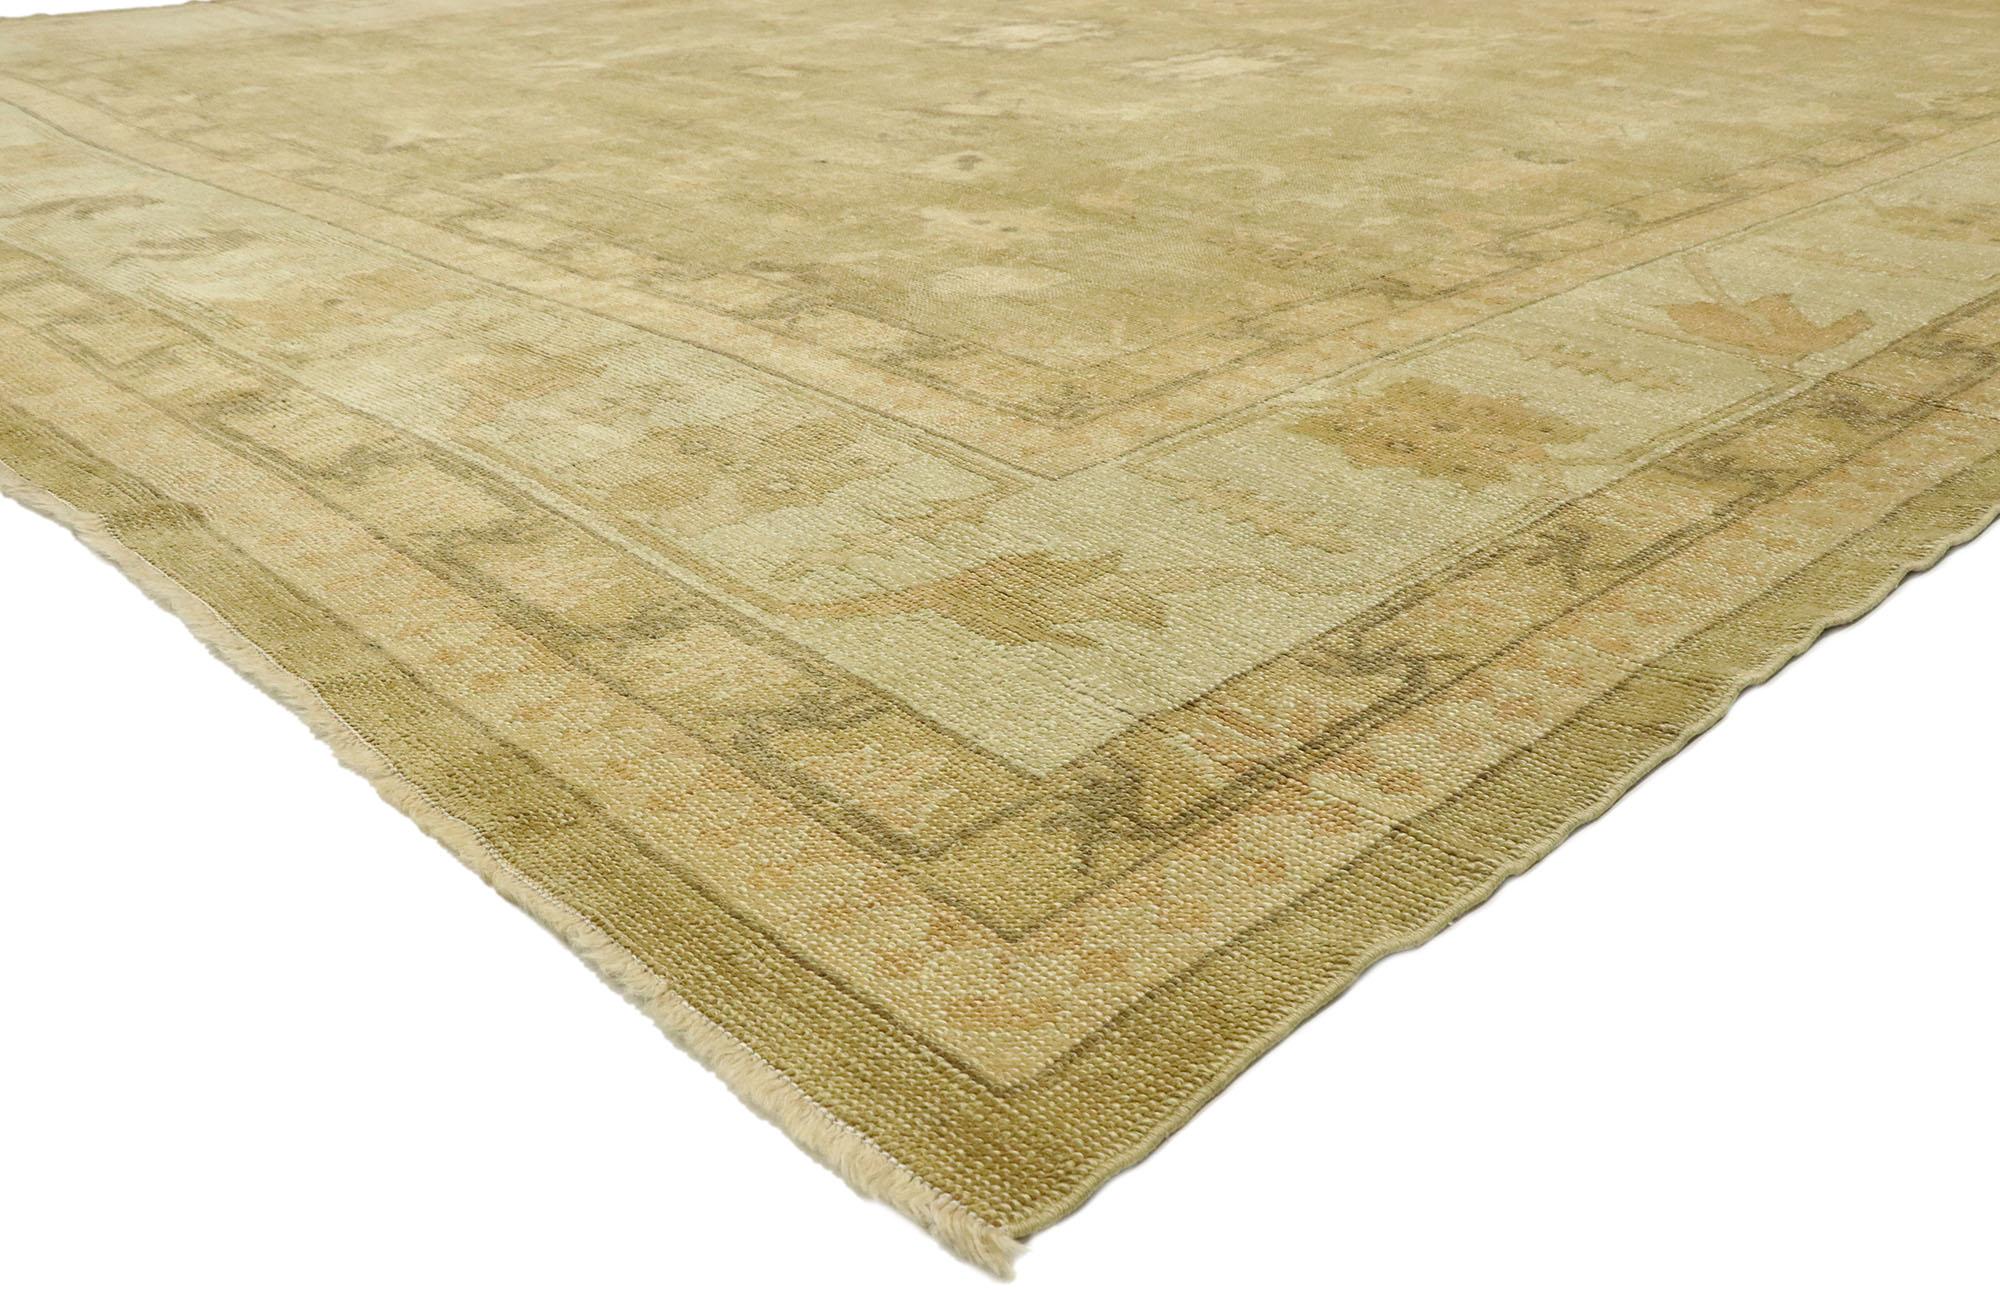 51595 new contemporary Turkish oushak rug with Transitional style in Neutral Earth-Tones 113'01 x 18'02. ??This hand knotted wool new contemporary Turkish Oushak rug features an all-over botanical pattern composed of Harshang-style motifs, organic